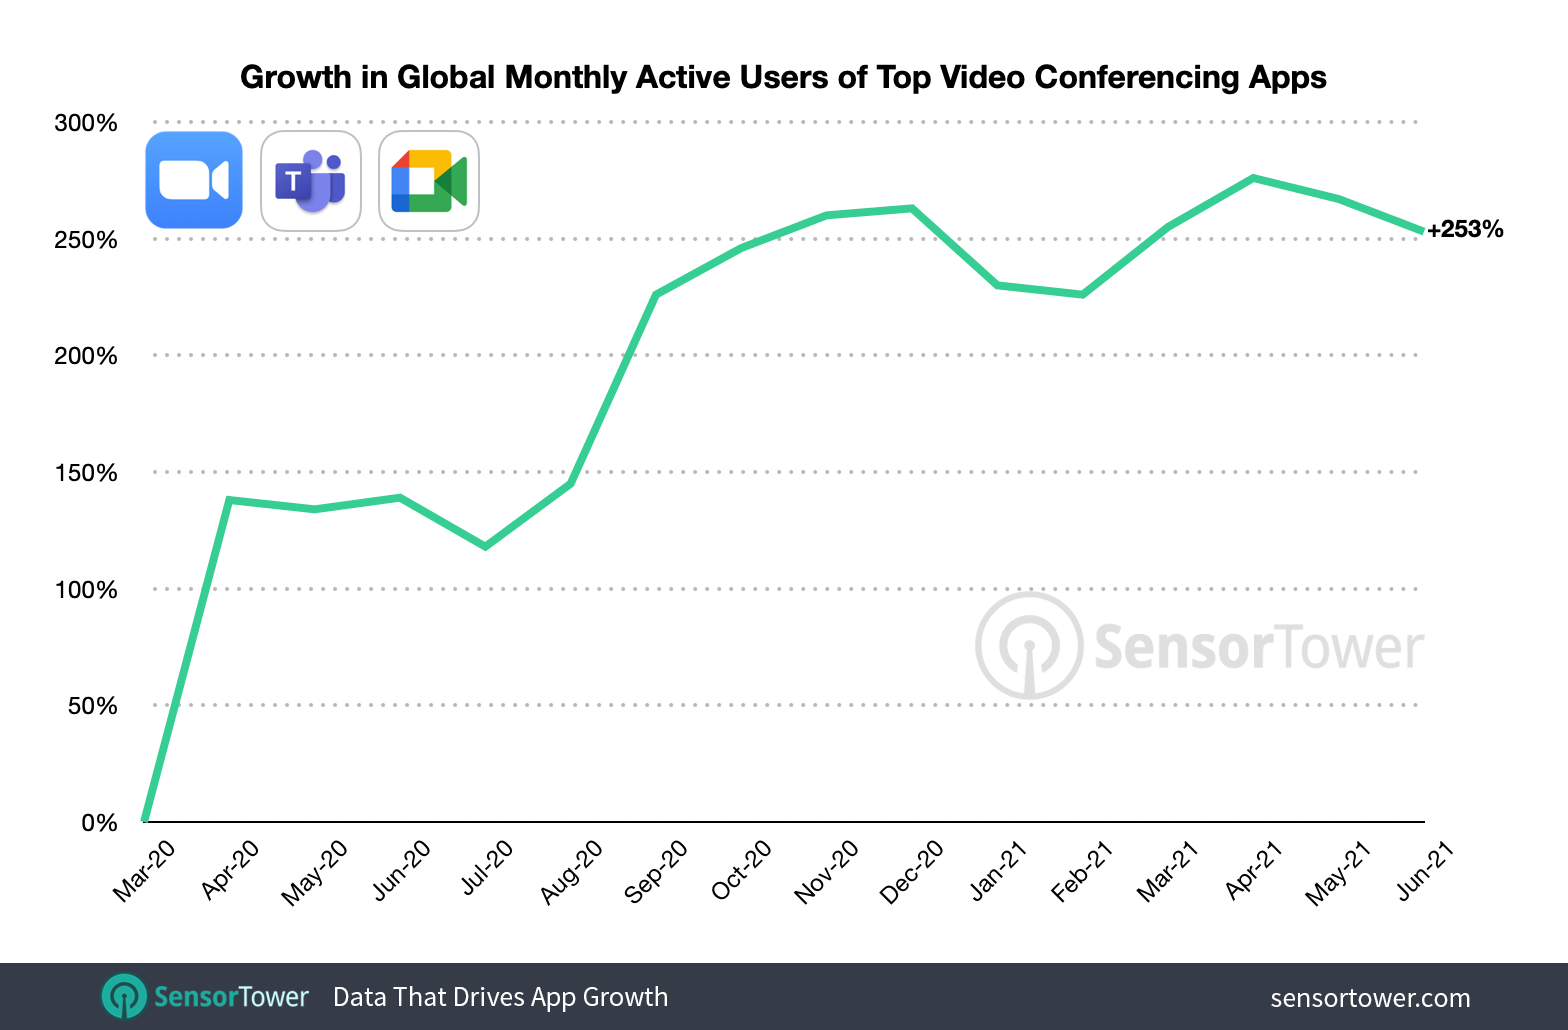 June 2021's monthly active users for Zoom, Microsoft Teams, and Google Meet were 2.5 times higher when indexed against March 2020